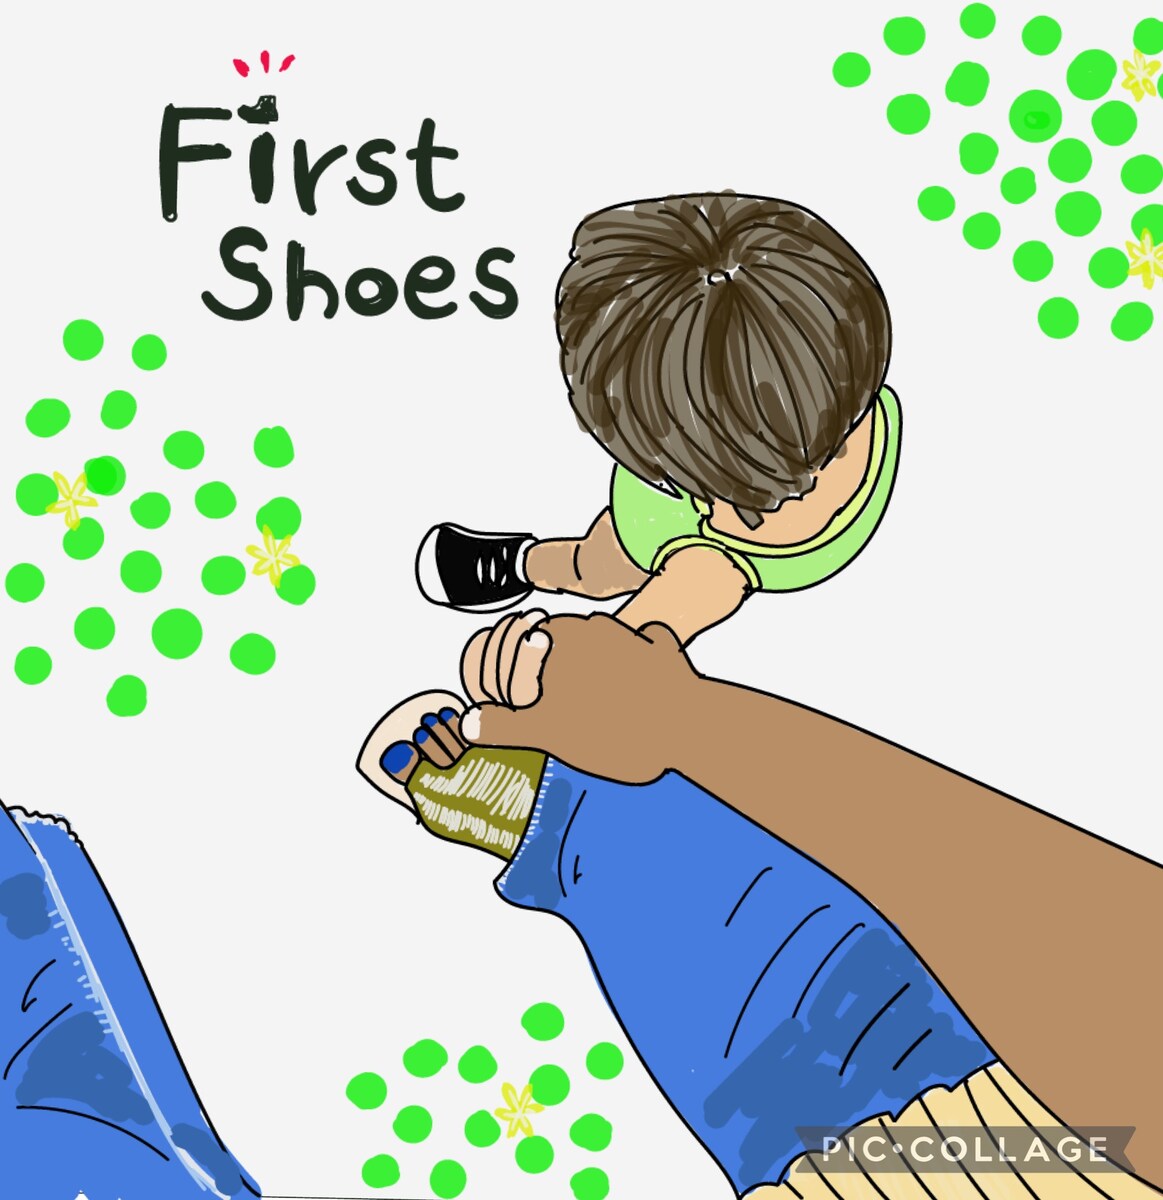 First Shoesでお散歩